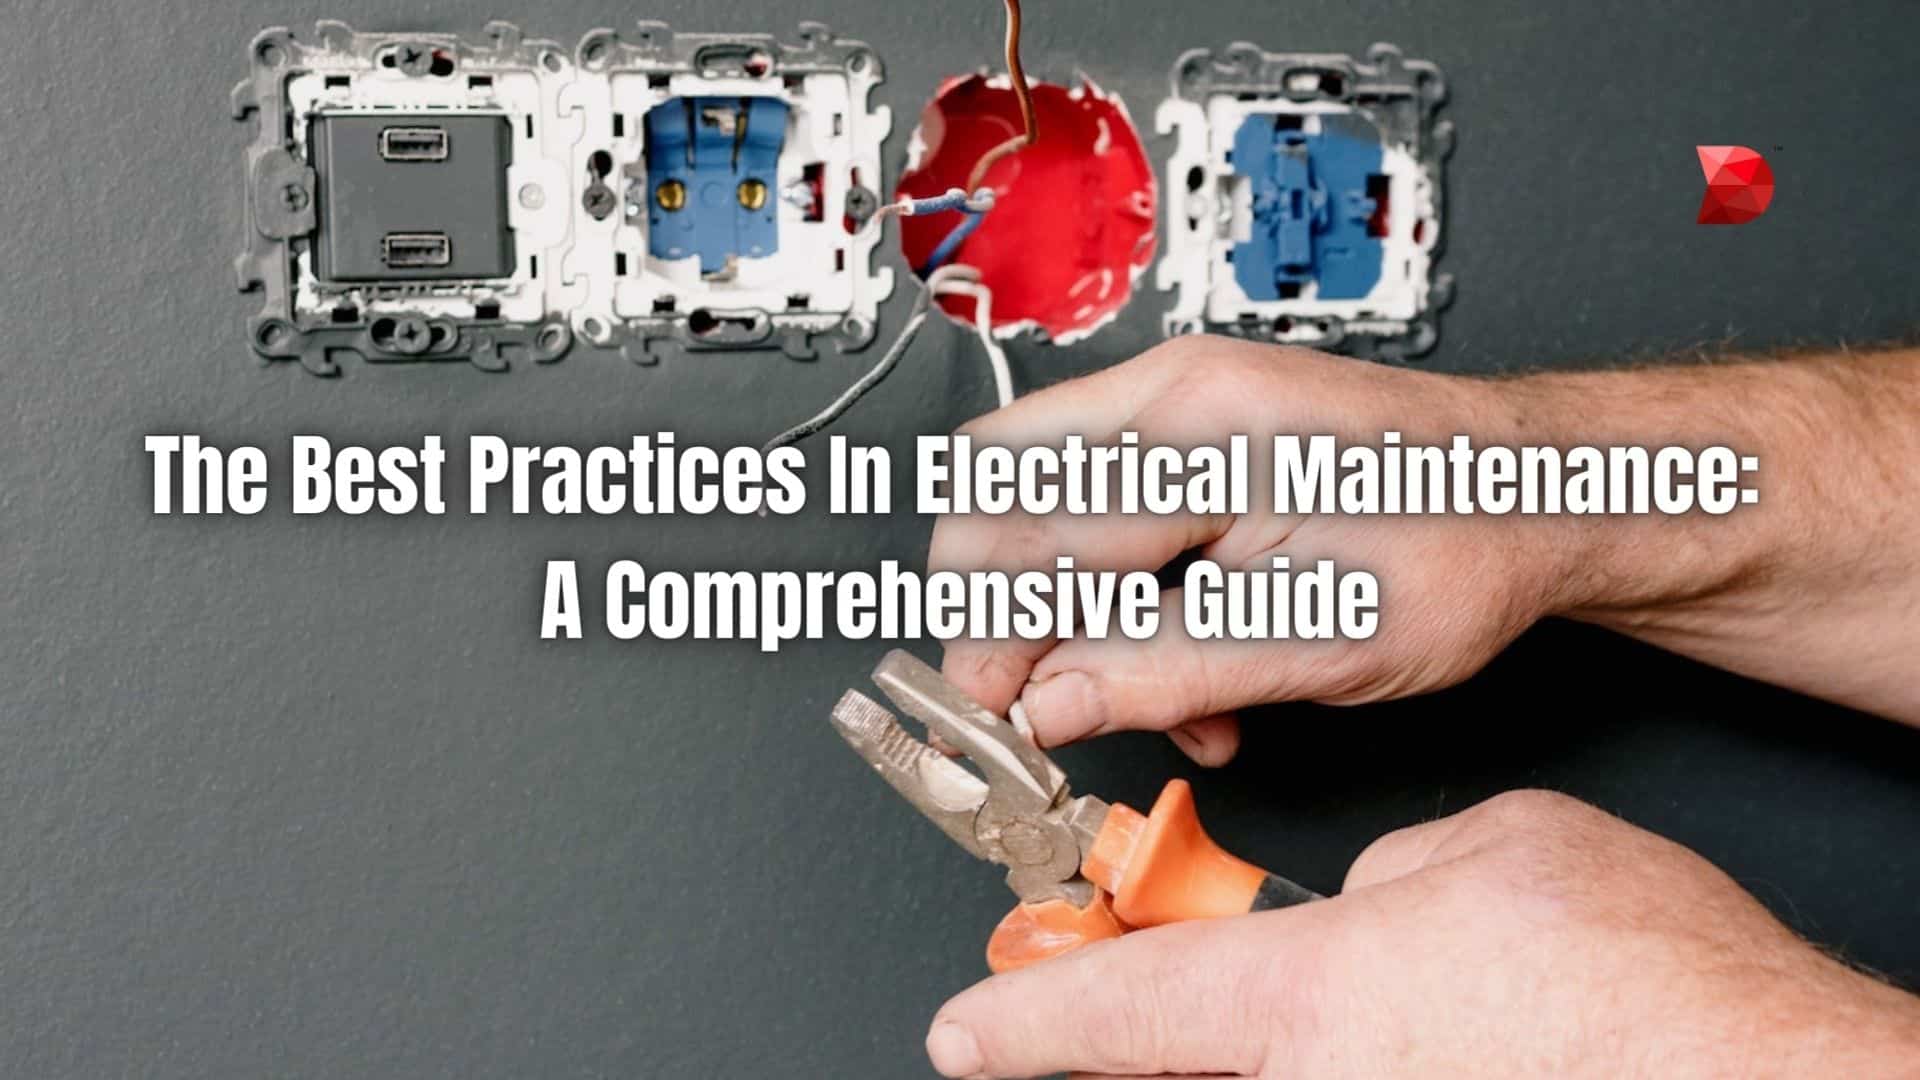 The Best Practices In Electrical Maintenance A Comprehensive Guide